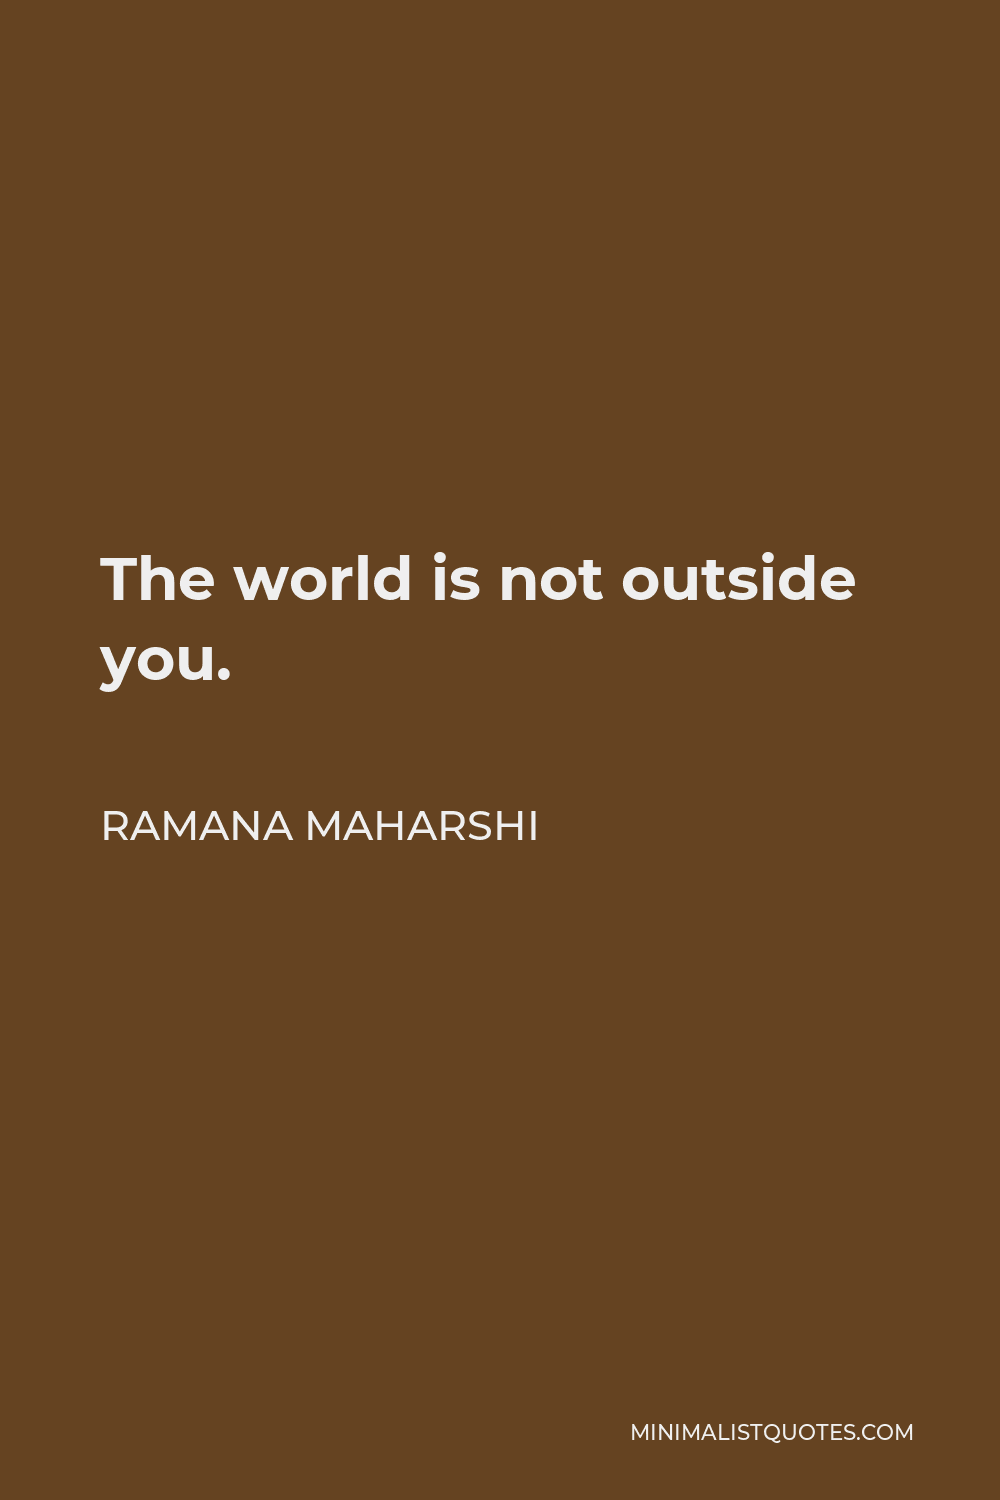 Ramana Maharshi Quote - The world is not outside you.